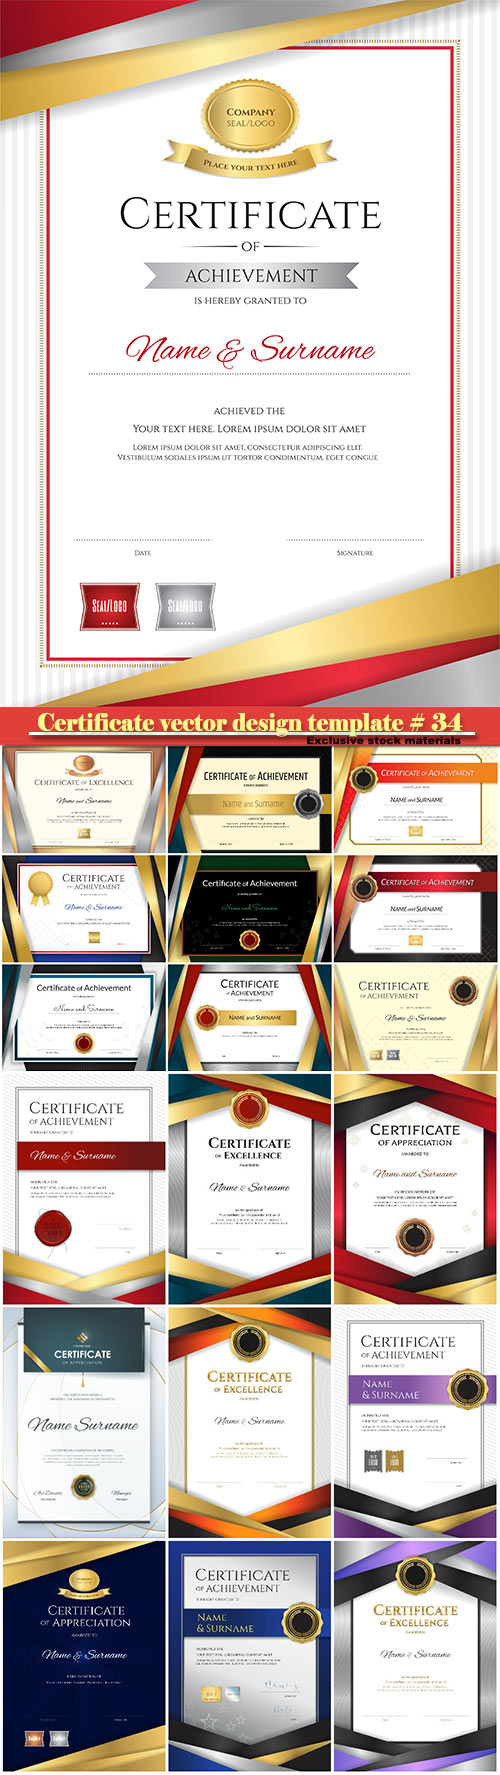 Certificate and vector diploma design template # 34